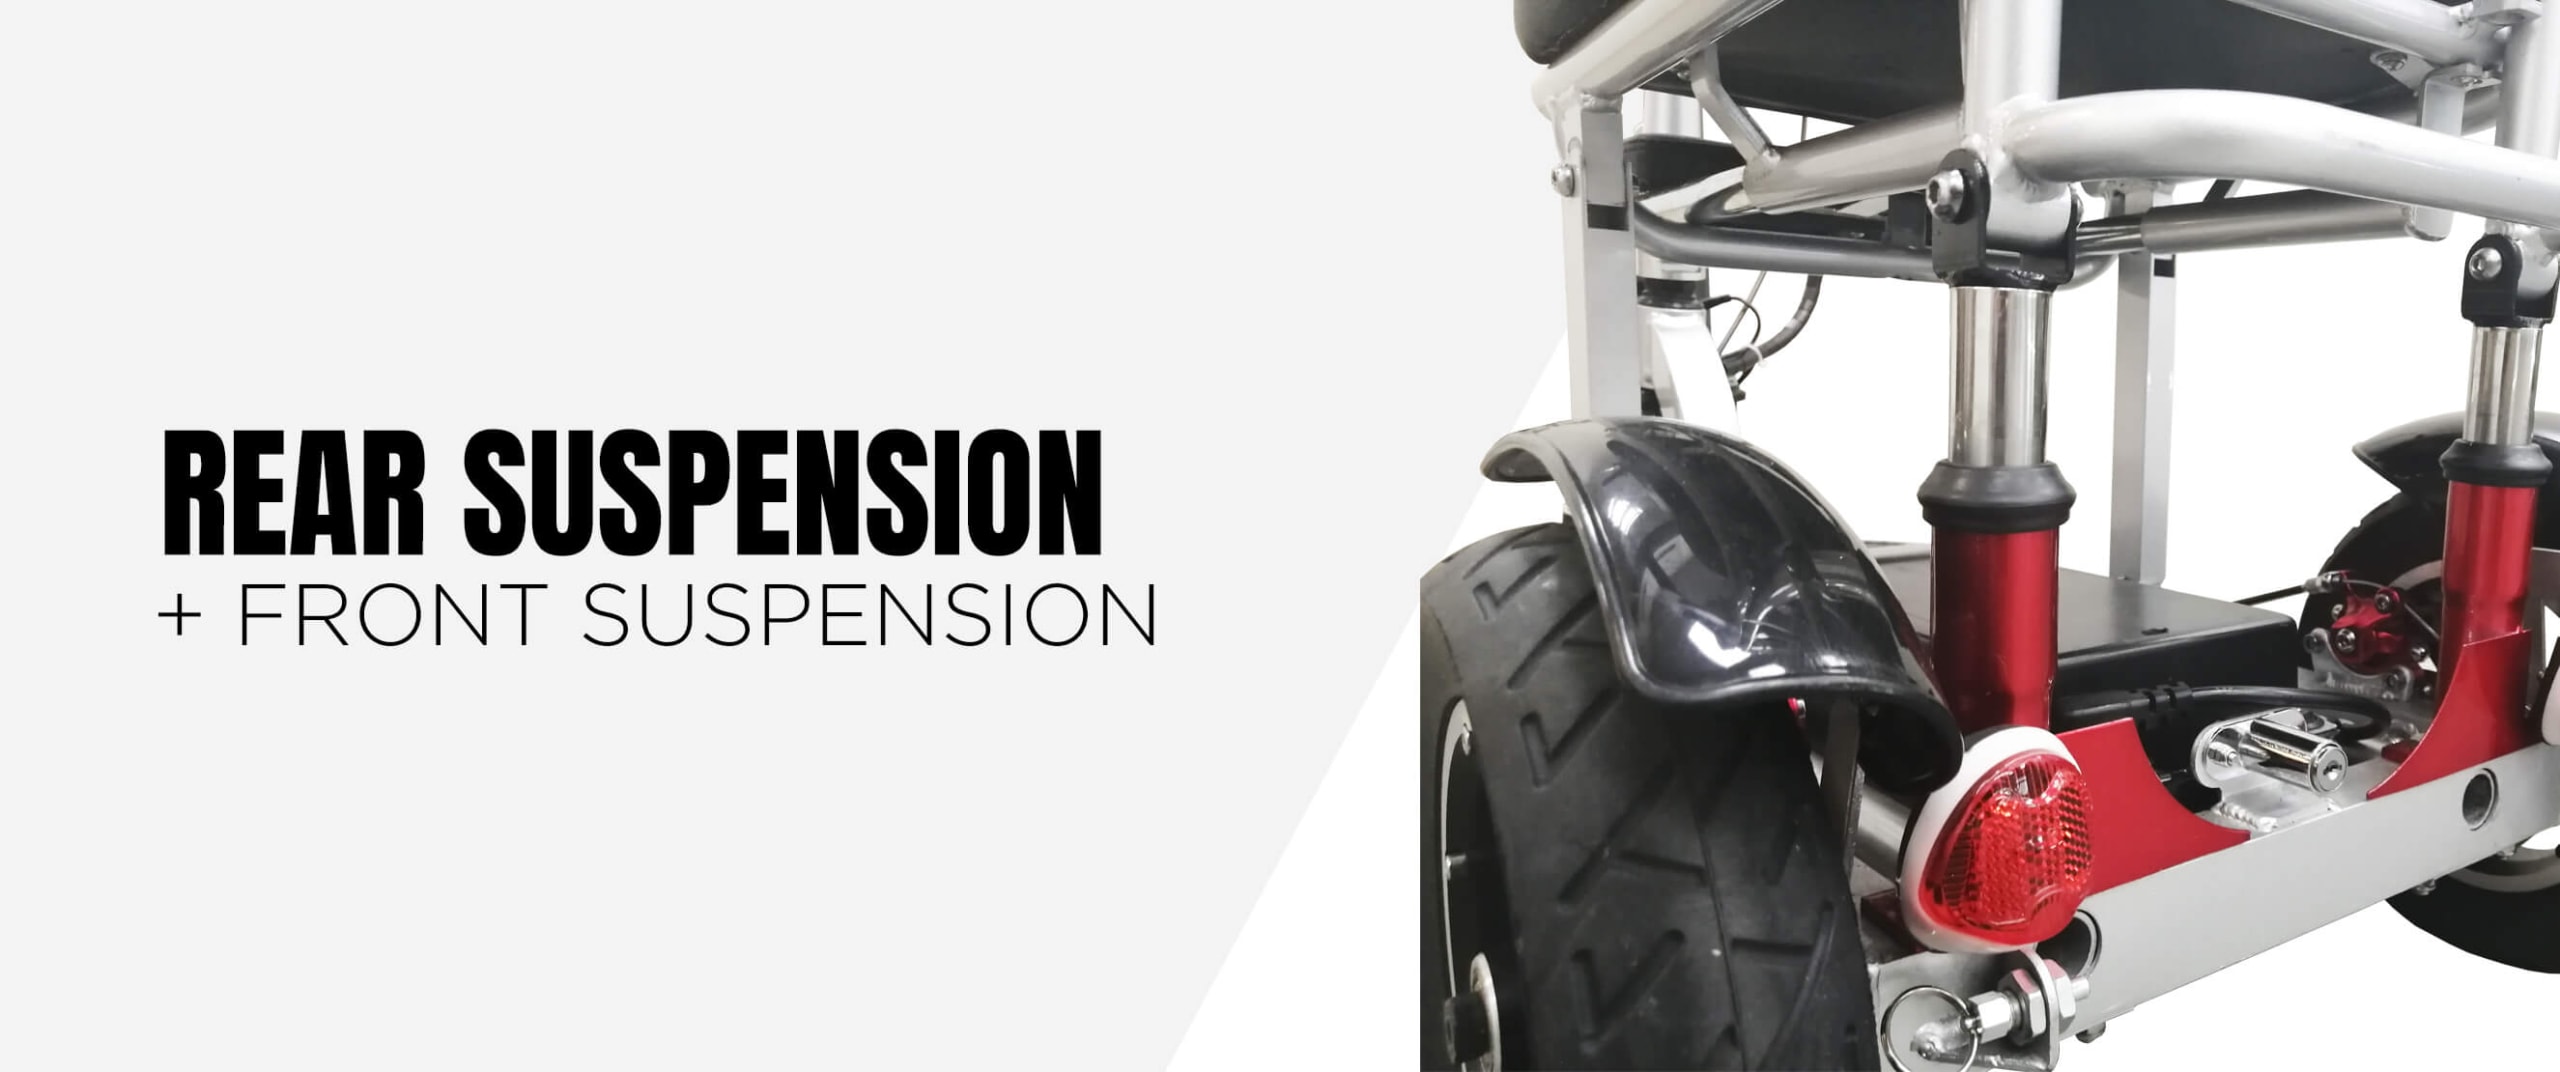 MOBOT FLEXI TITAN 3 wheels mobility scooter suspension